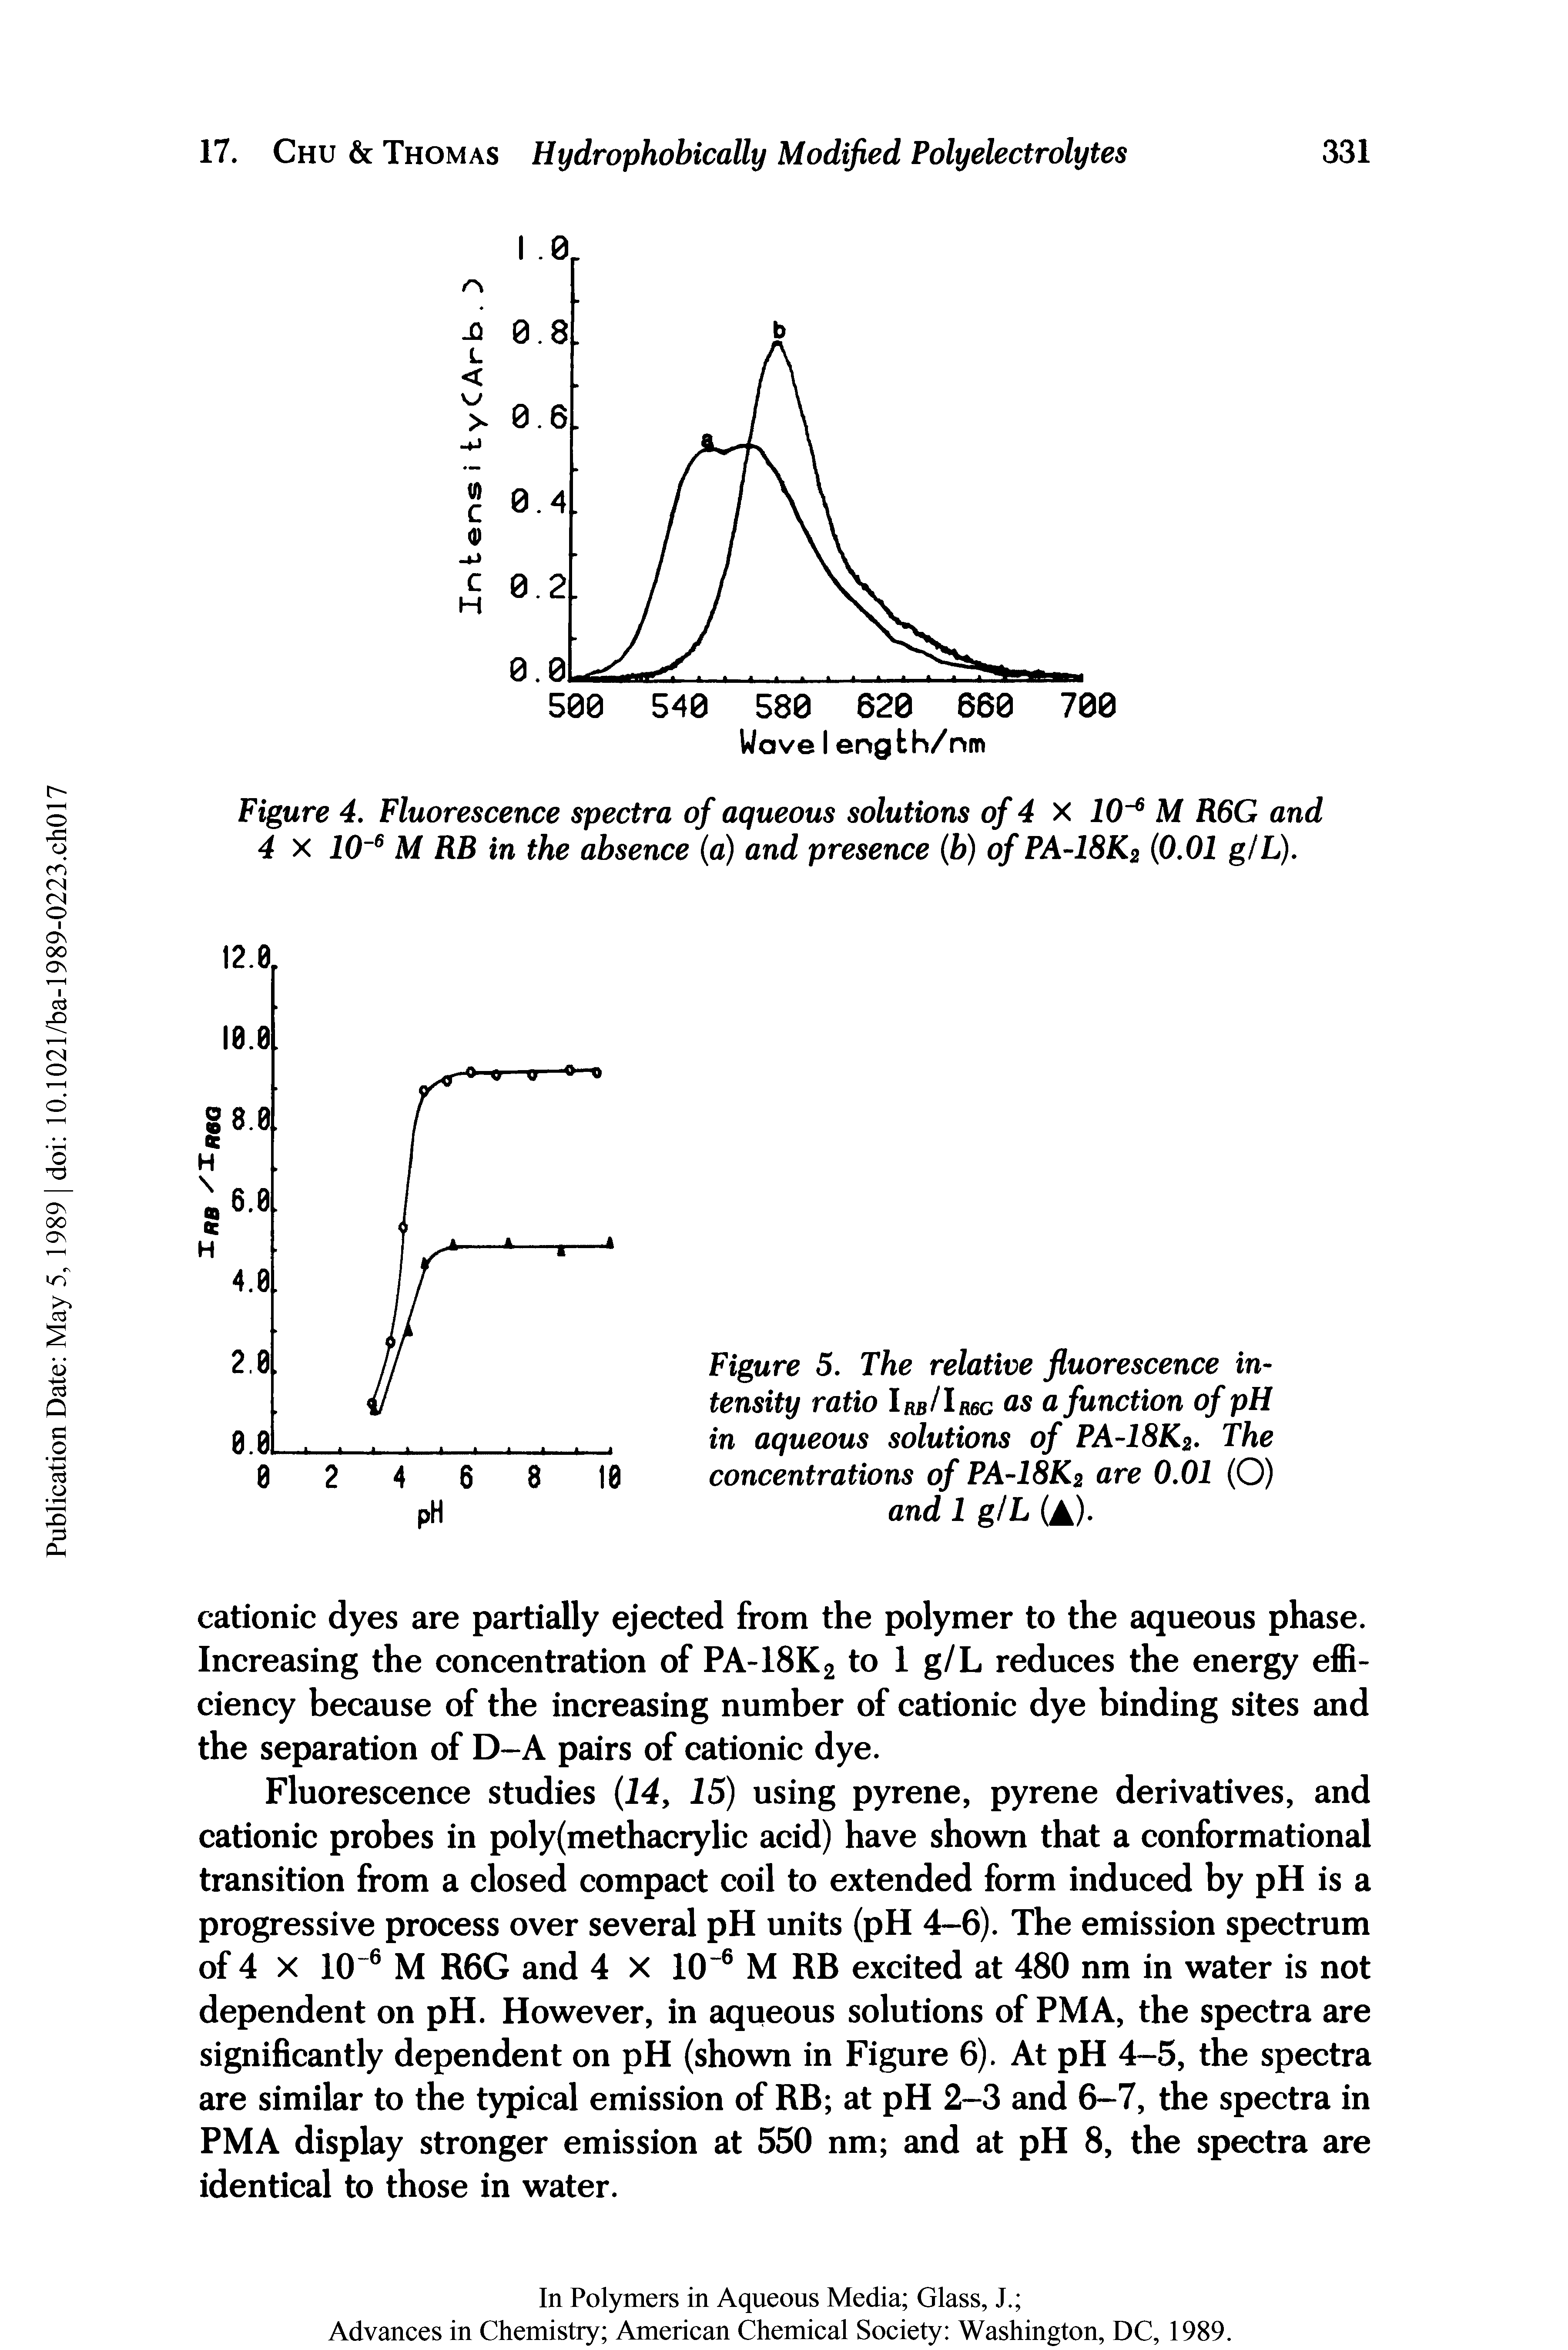 Figure 5. The relative fluorescence intensity ratio Irb/Ir6g as a function of pH in aqueous solutions of PA-I8K2. The concentrations of PA-I8K2 are 0.01 (O) and 1 giL (A).